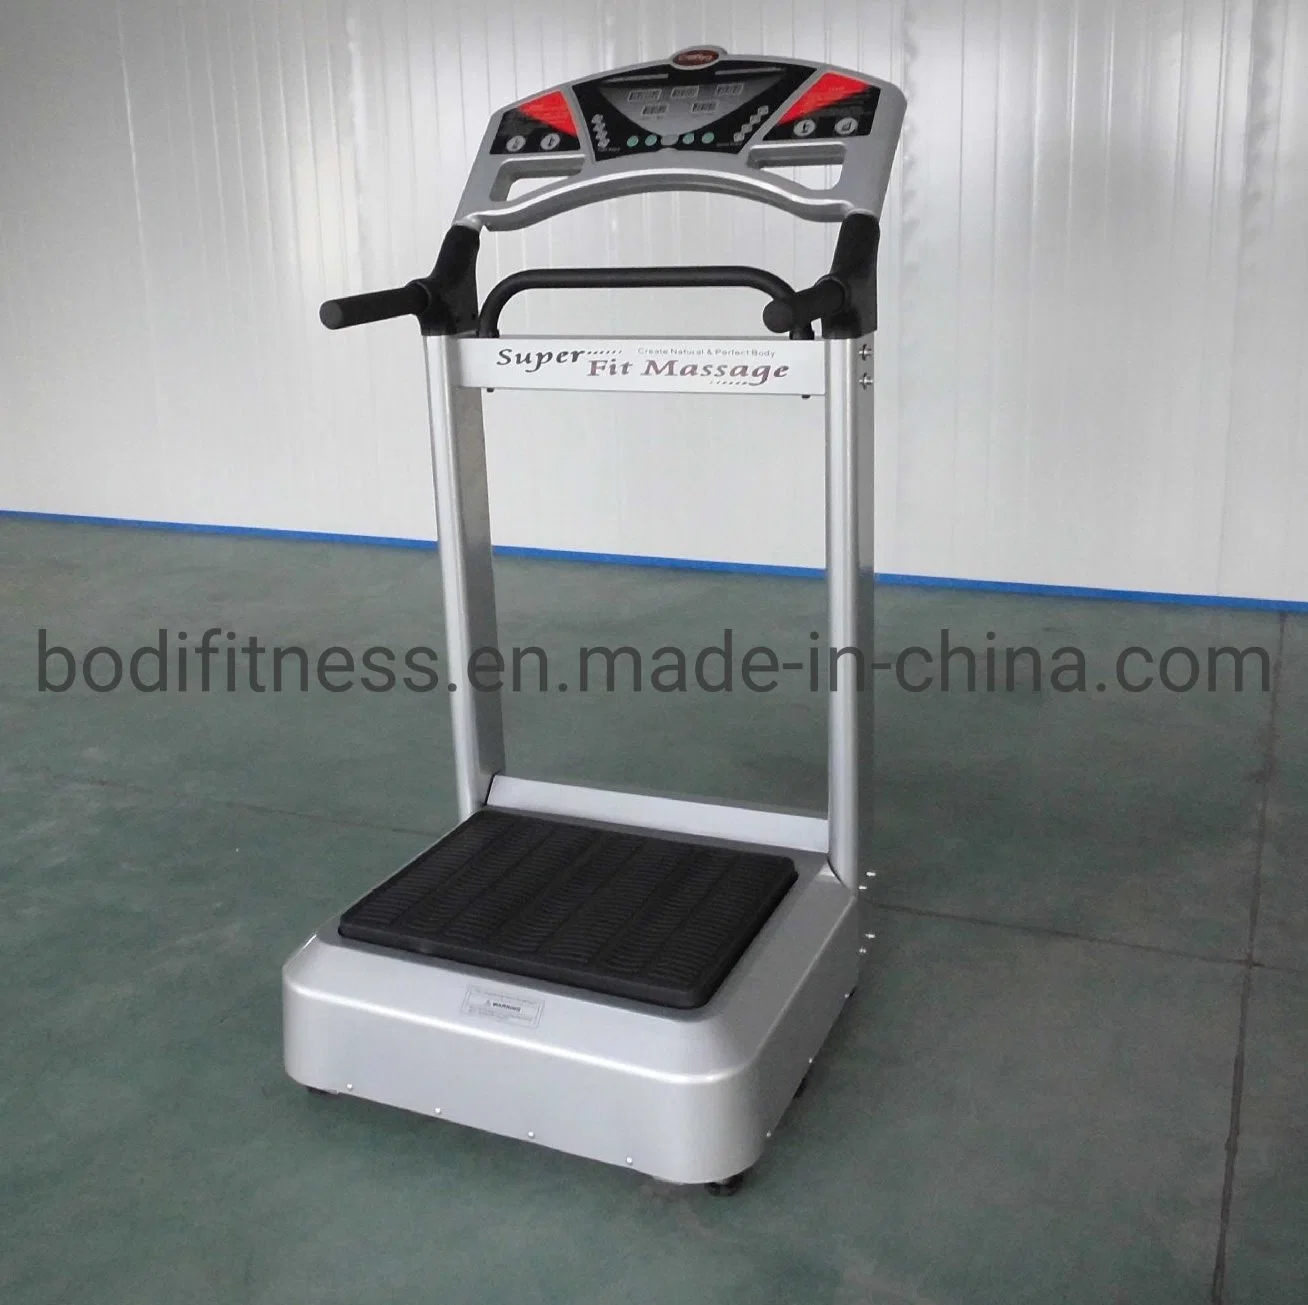 Gym Whole Body Vibrating Power Crazy Fit Massage Vibration Plate with Handle Machine Body Fitness Training Power Vibration Plate Machine